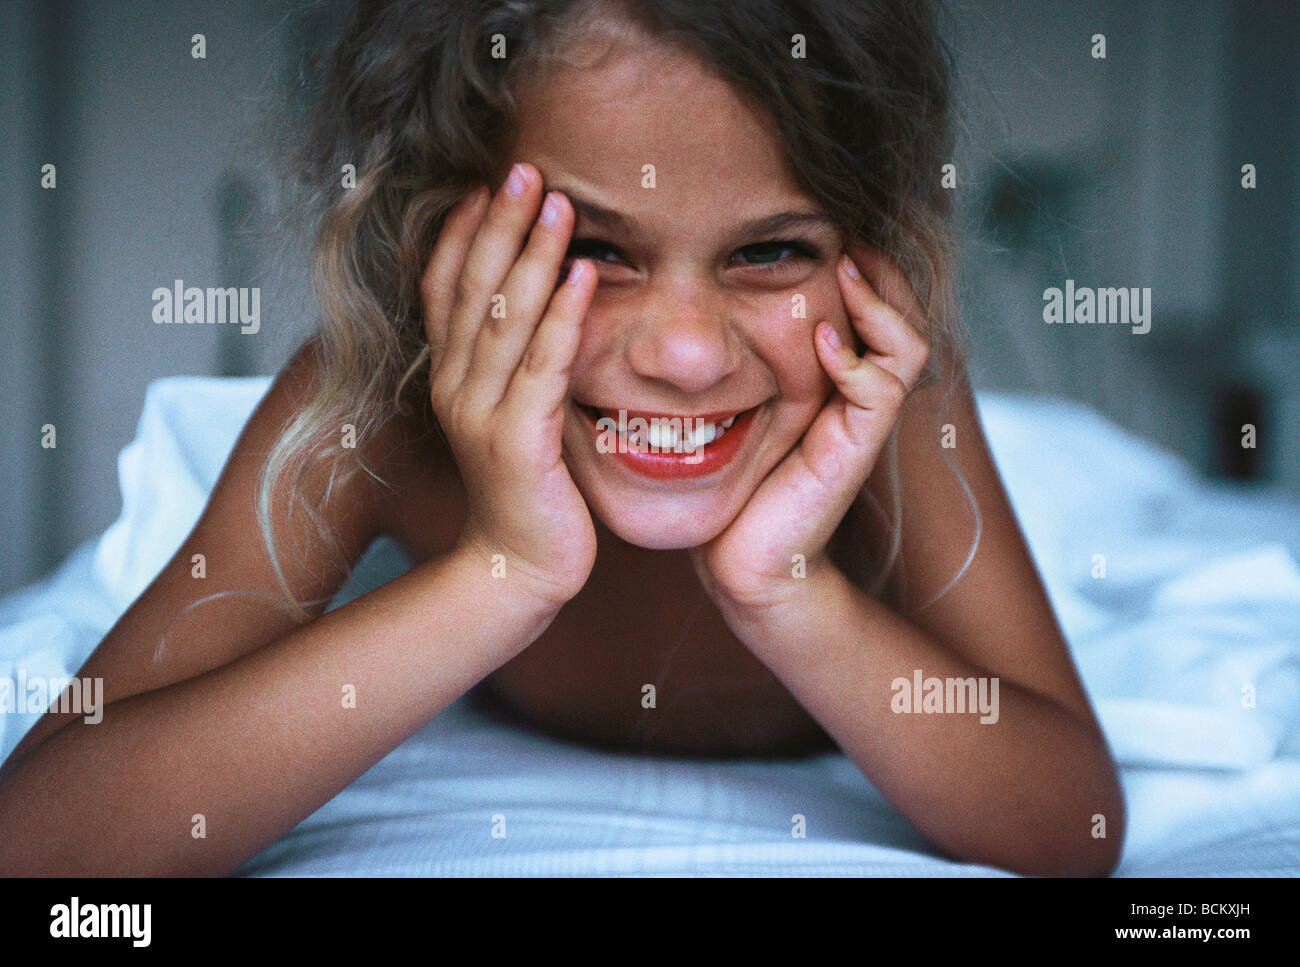 Girl lying in bed, leaning on elbow and laughing Stock Photo